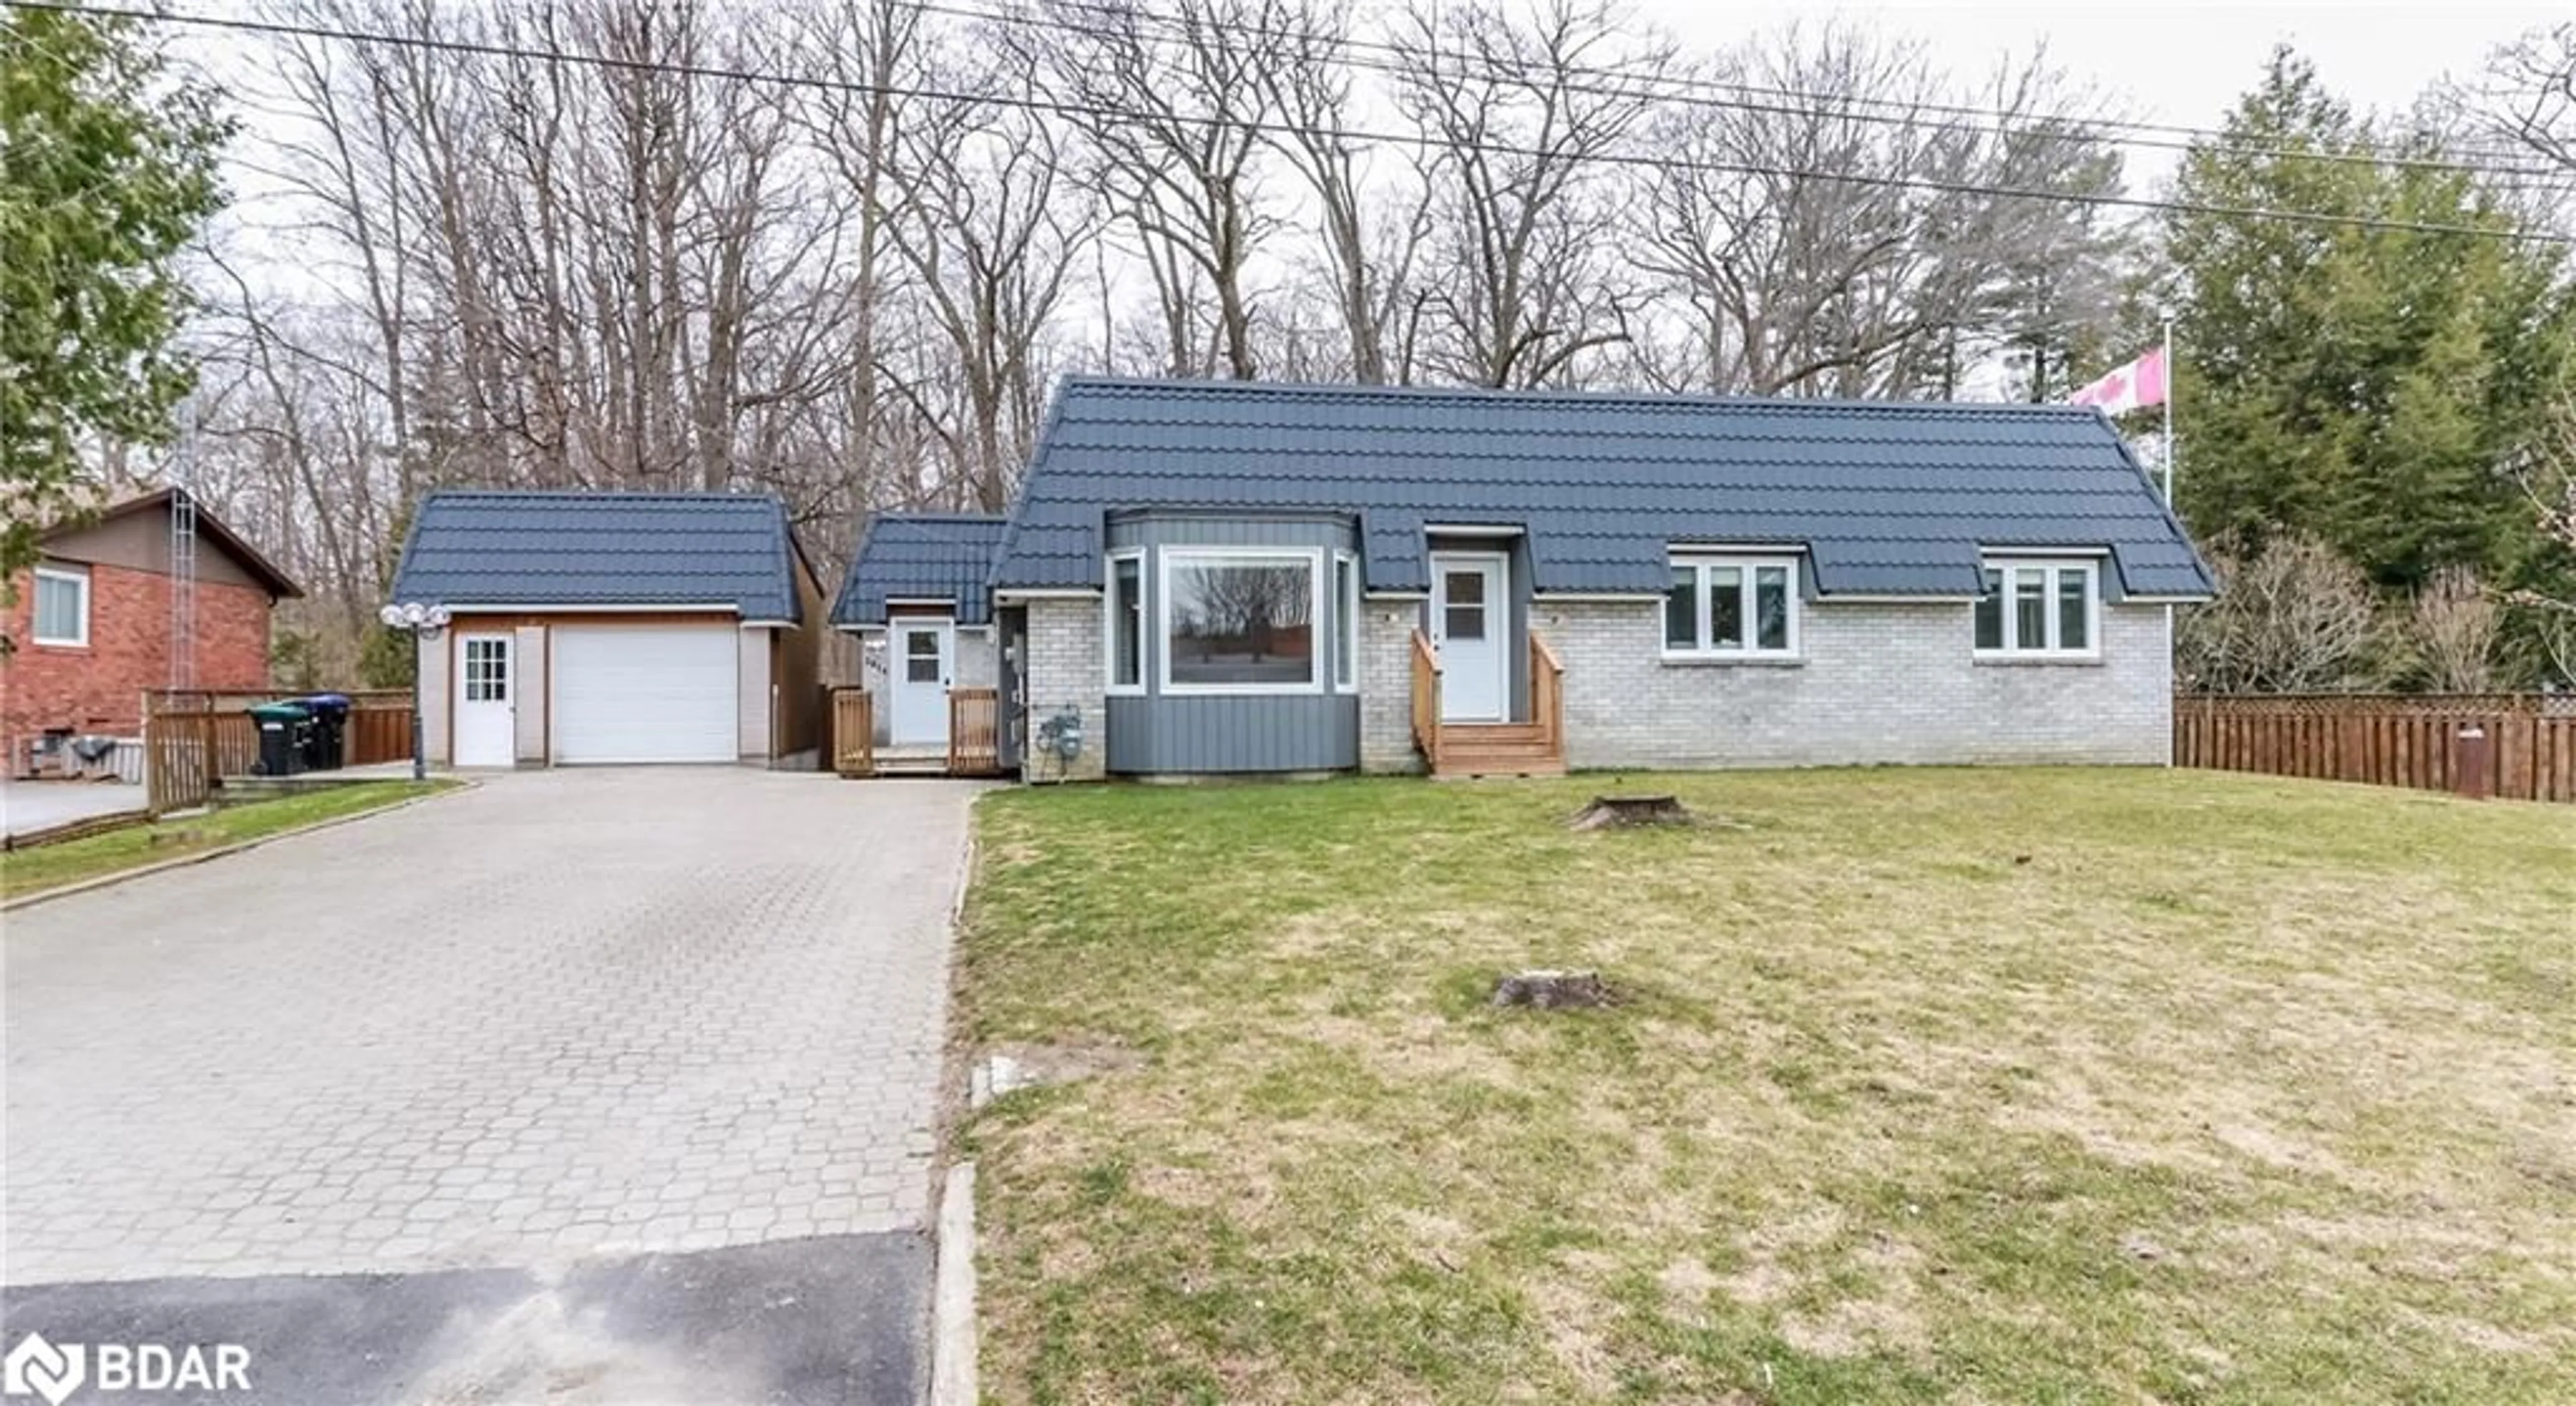 Cottage for 3914 Rosemary Lane, Innisfil Ontario L9S 2L6